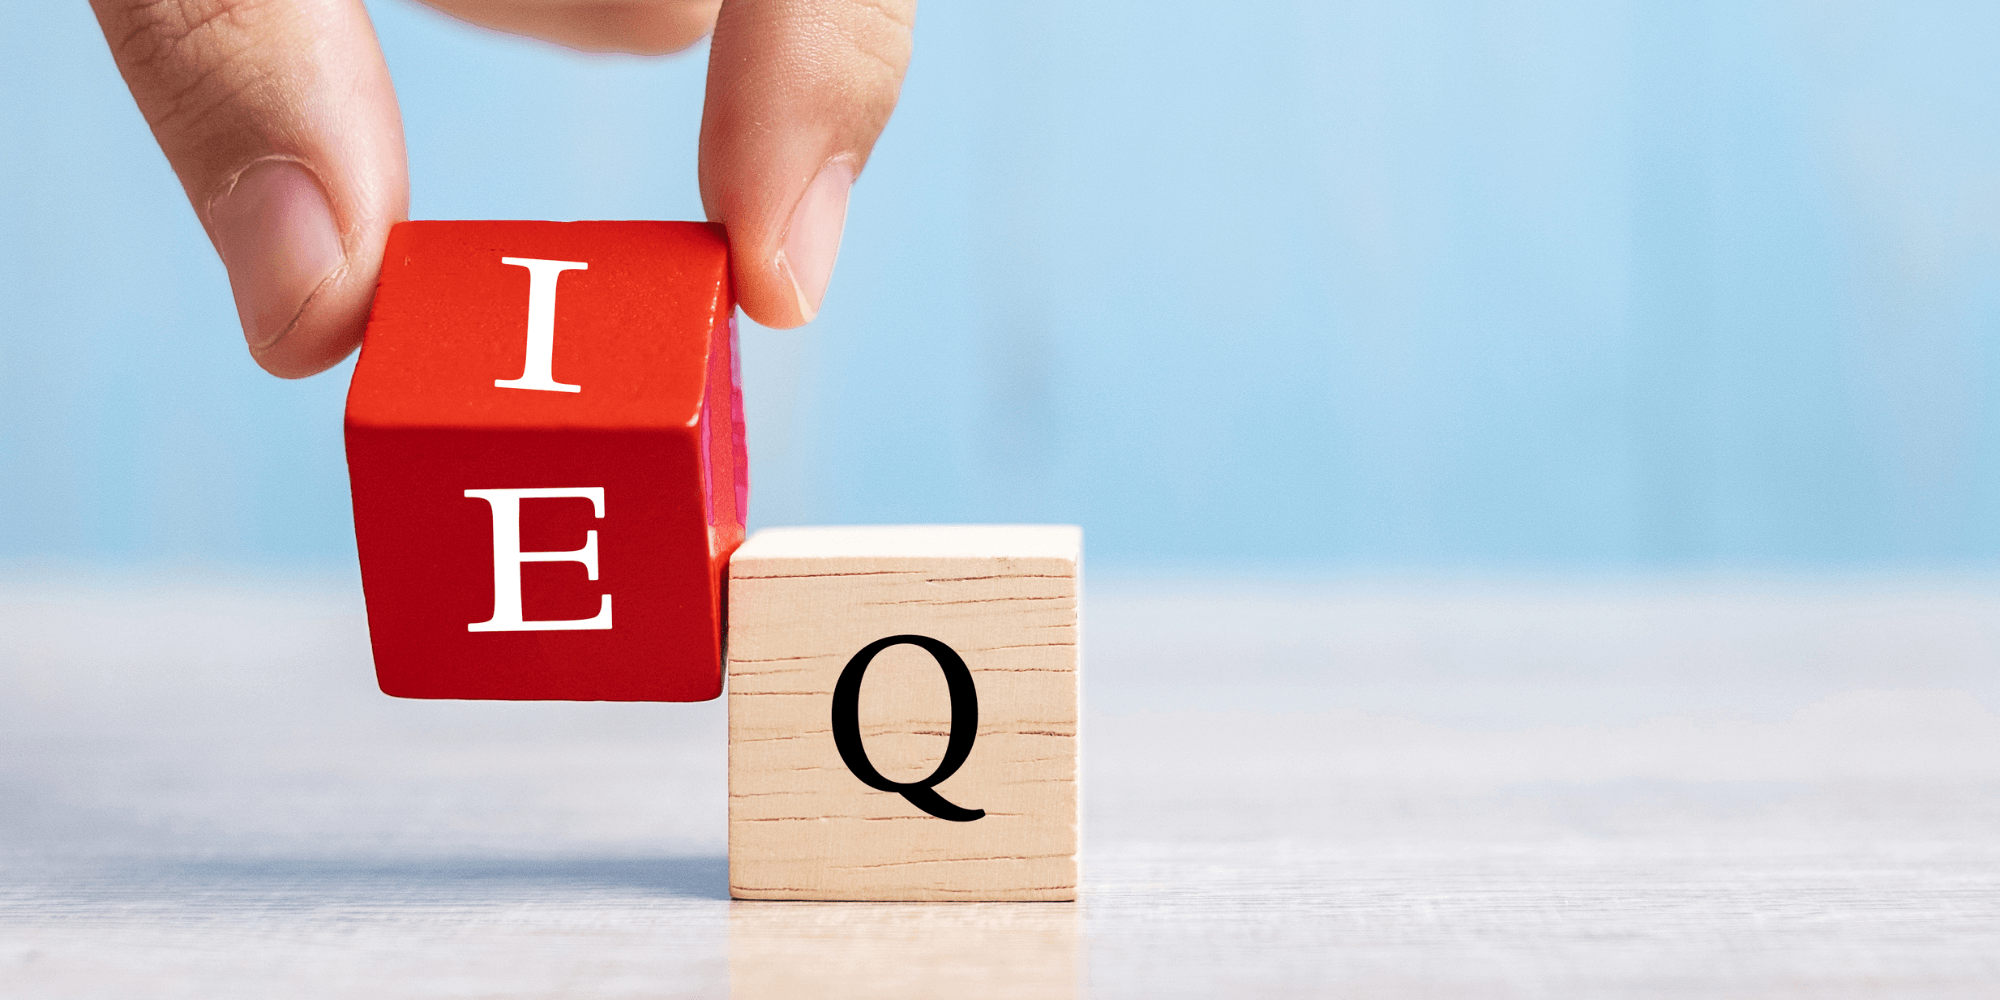 A hand holding two wooden blocks representing the letters E and Q for emotional intelligence